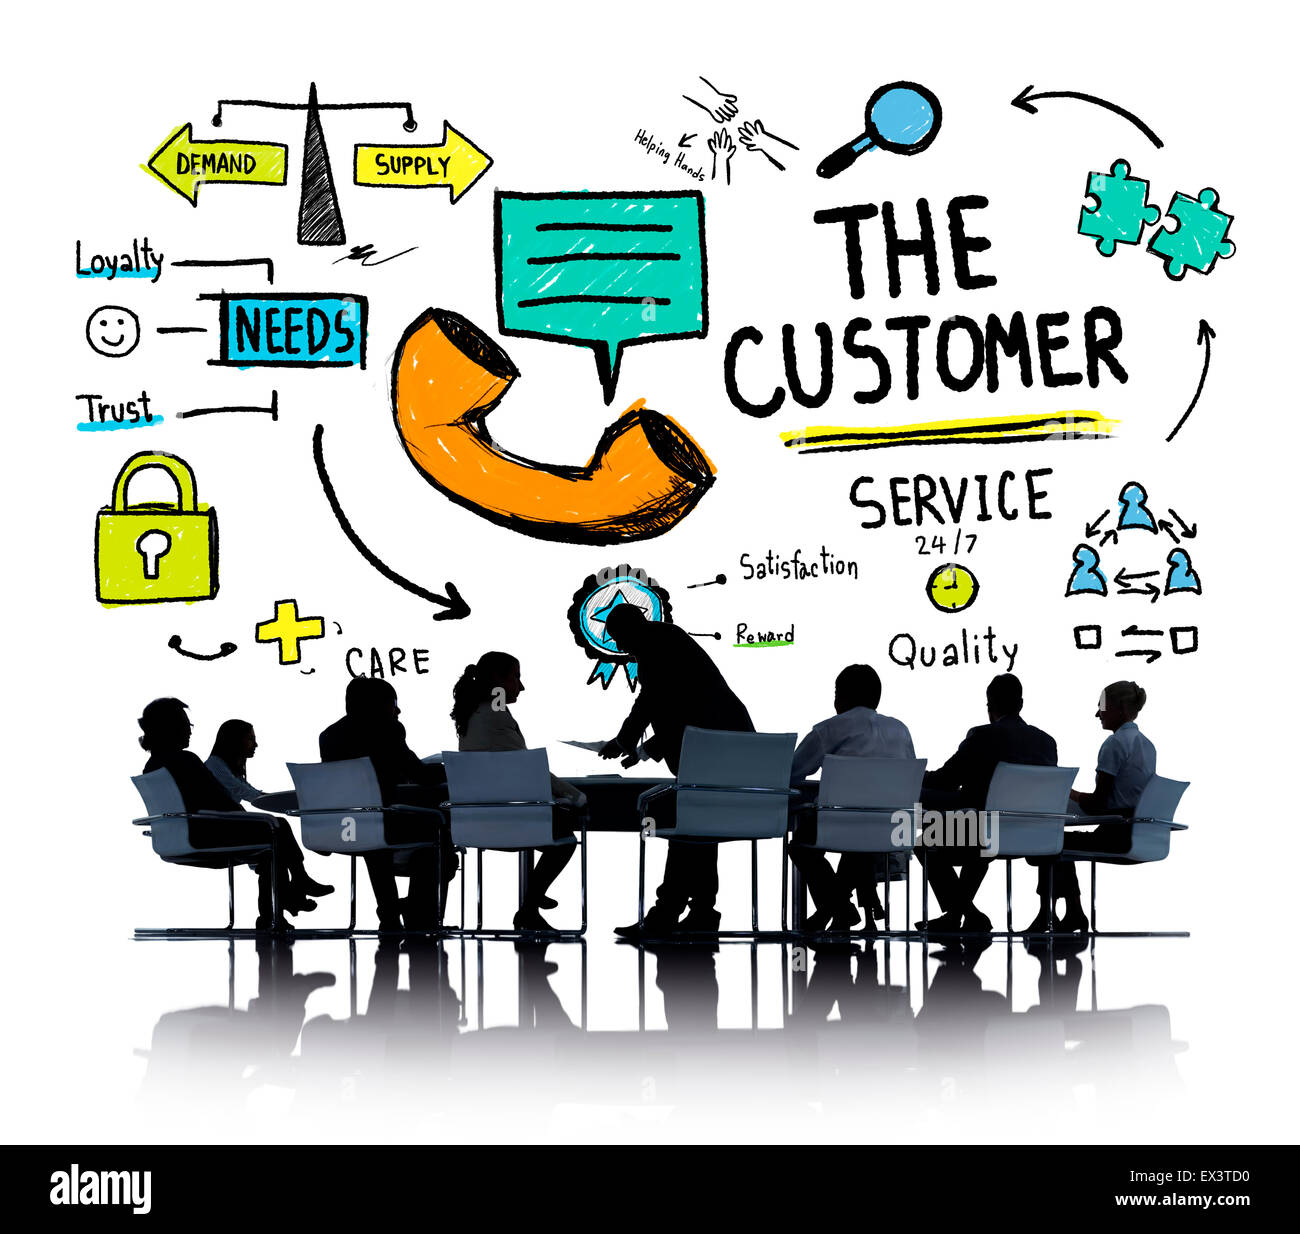 The Customer Service Target Market Support Assistance Concept Stock Photo